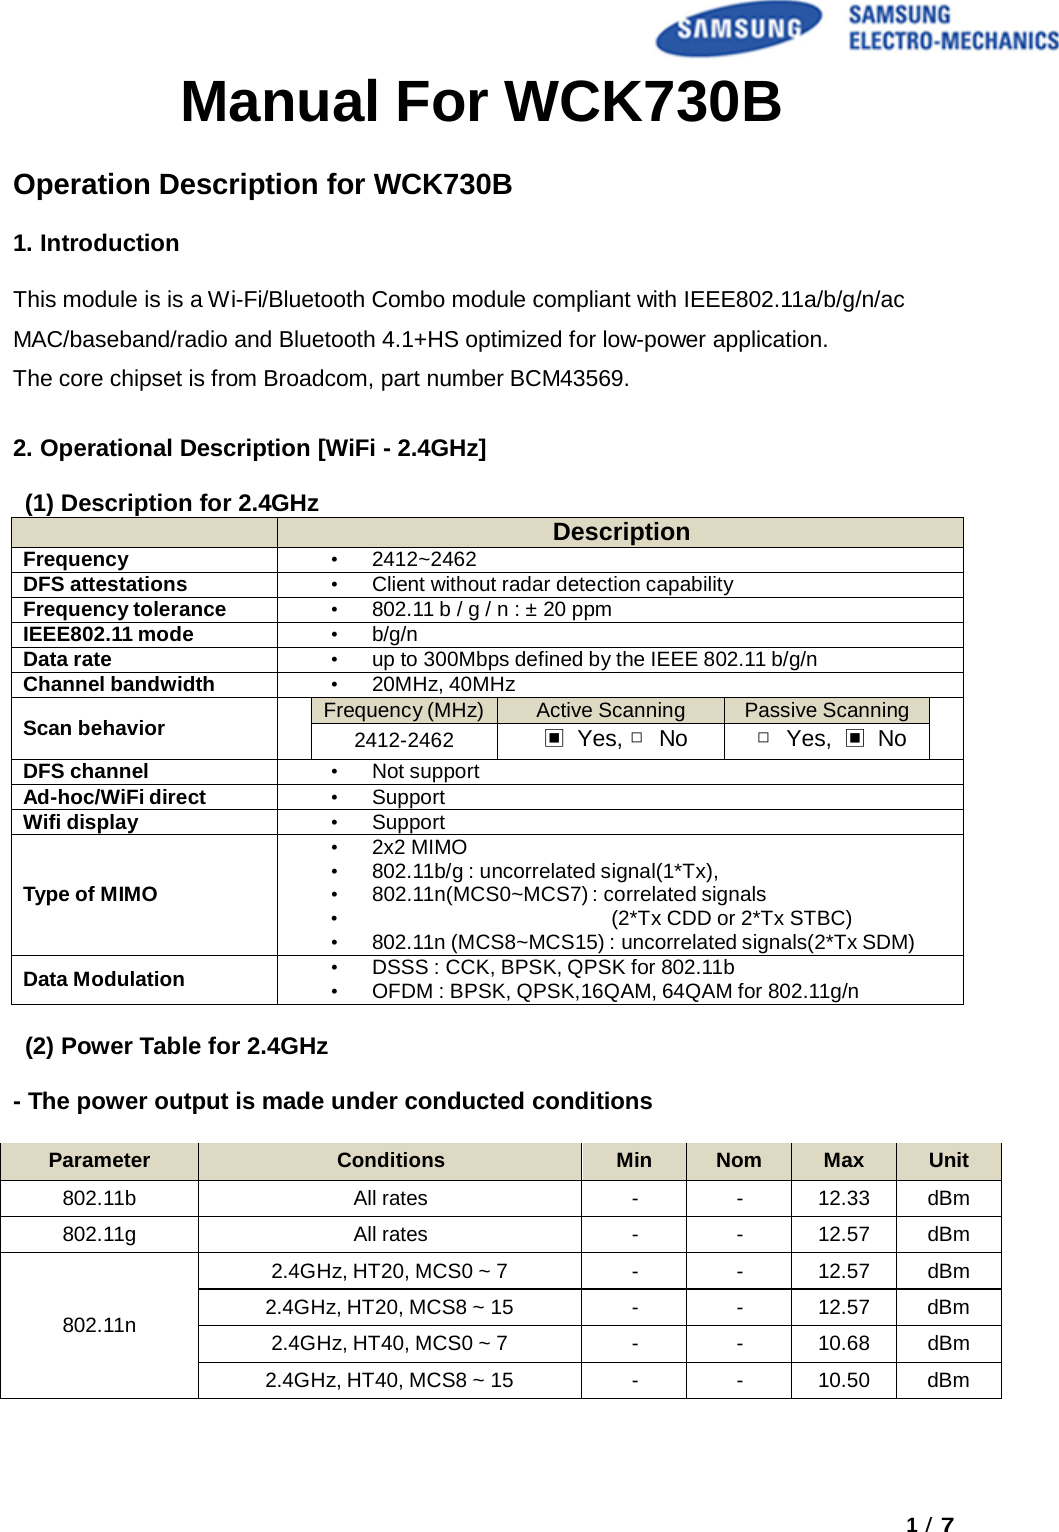    Manual For WCK730B   Operation Description for WCK730B  1. Introduction  This module is is a Wi-Fi/Bluetooth Combo module compliant with IEEE802.11a/b/g/n/ac  MAC/baseband/radio and Bluetooth 4.1+HS optimized for low-power application. The core chipset is from Broadcom, part number BCM43569. 2. Operational Description [WiFi - 2.4GHz] (1) Description for 2.4GHz  Description Frequency •  2412~2462 DFS attestations •  Client without radar detection capability Frequency tolerance •  802.11 b / g / n : ± 20 ppm IEEE802.11 mode •  b/g/n Data rate •  up to 300Mbps defined by the IEEE 802.11 b/g/n Channel bandwidth •  20MHz, 40MHz  Scan behavior  Frequency (MHz) Active Scanning Passive Scanning  2412-2462 ▣ Yes, □ No □ Yes, ▣ No DFS channel •  Not support Ad-hoc/WiFi direct •  Support Wifi display •  Support   Type of MIMO •  2x2 MIMO •  802.11b/g : uncorrelated signal(1*Tx), •  802.11n(MCS0~MCS7) : correlated signals •  (2*Tx CDD or 2*Tx STBC) •  802.11n (MCS8~MCS15) : uncorrelated signals(2*Tx SDM)  Data Modulation •  DSSS : CCK, BPSK, QPSK for 802.11b •  OFDM : BPSK, QPSK,16QAM, 64QAM for 802.11g/n  (2) Power Table for 2.4GHz  - The power output is made under conducted conditions  Parameter Conditions Min Nom Max Unit 802.11b All rates - - 12.33 dBm 802.11g All rates - - 12.57 dBm    802.11n 2.4GHz, HT20, MCS0 ~ 7 - - 12.57 dBm 2.4GHz, HT20, MCS8 ~ 15 - - 12.57 dBm 2.4GHz, HT40, MCS0 ~ 7 - - 10.68 dBm 2.4GHz, HT40, MCS8 ~ 15 - - 10.50 dBm 1 / 7  